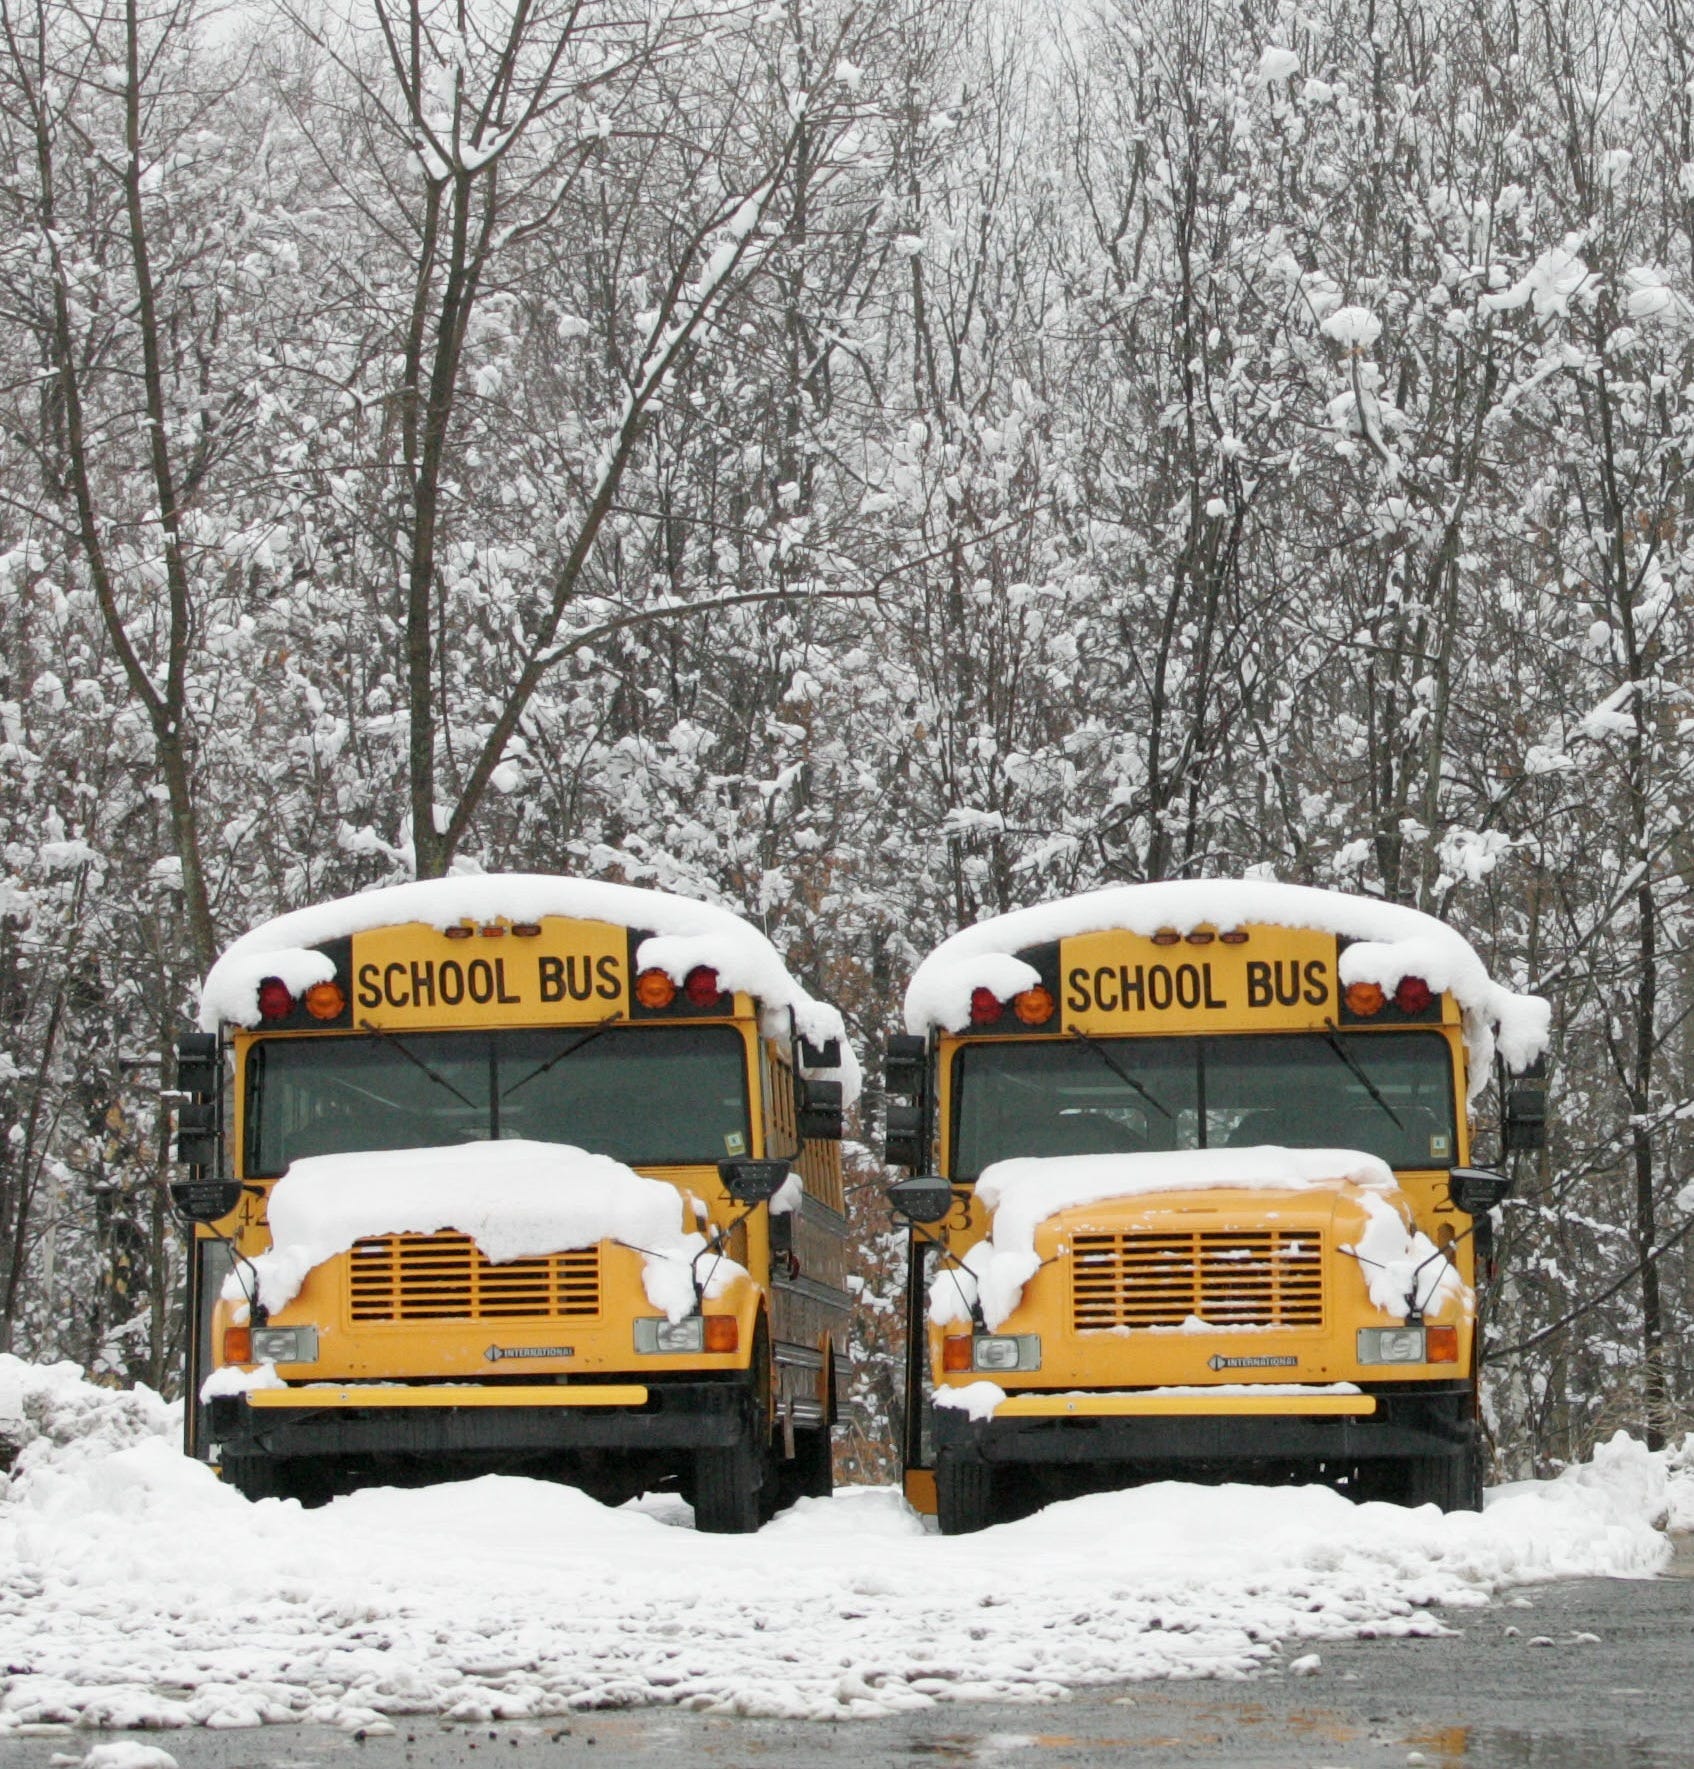 north jersey schools announce snow days, delayed openings for tuesday, feb. 13